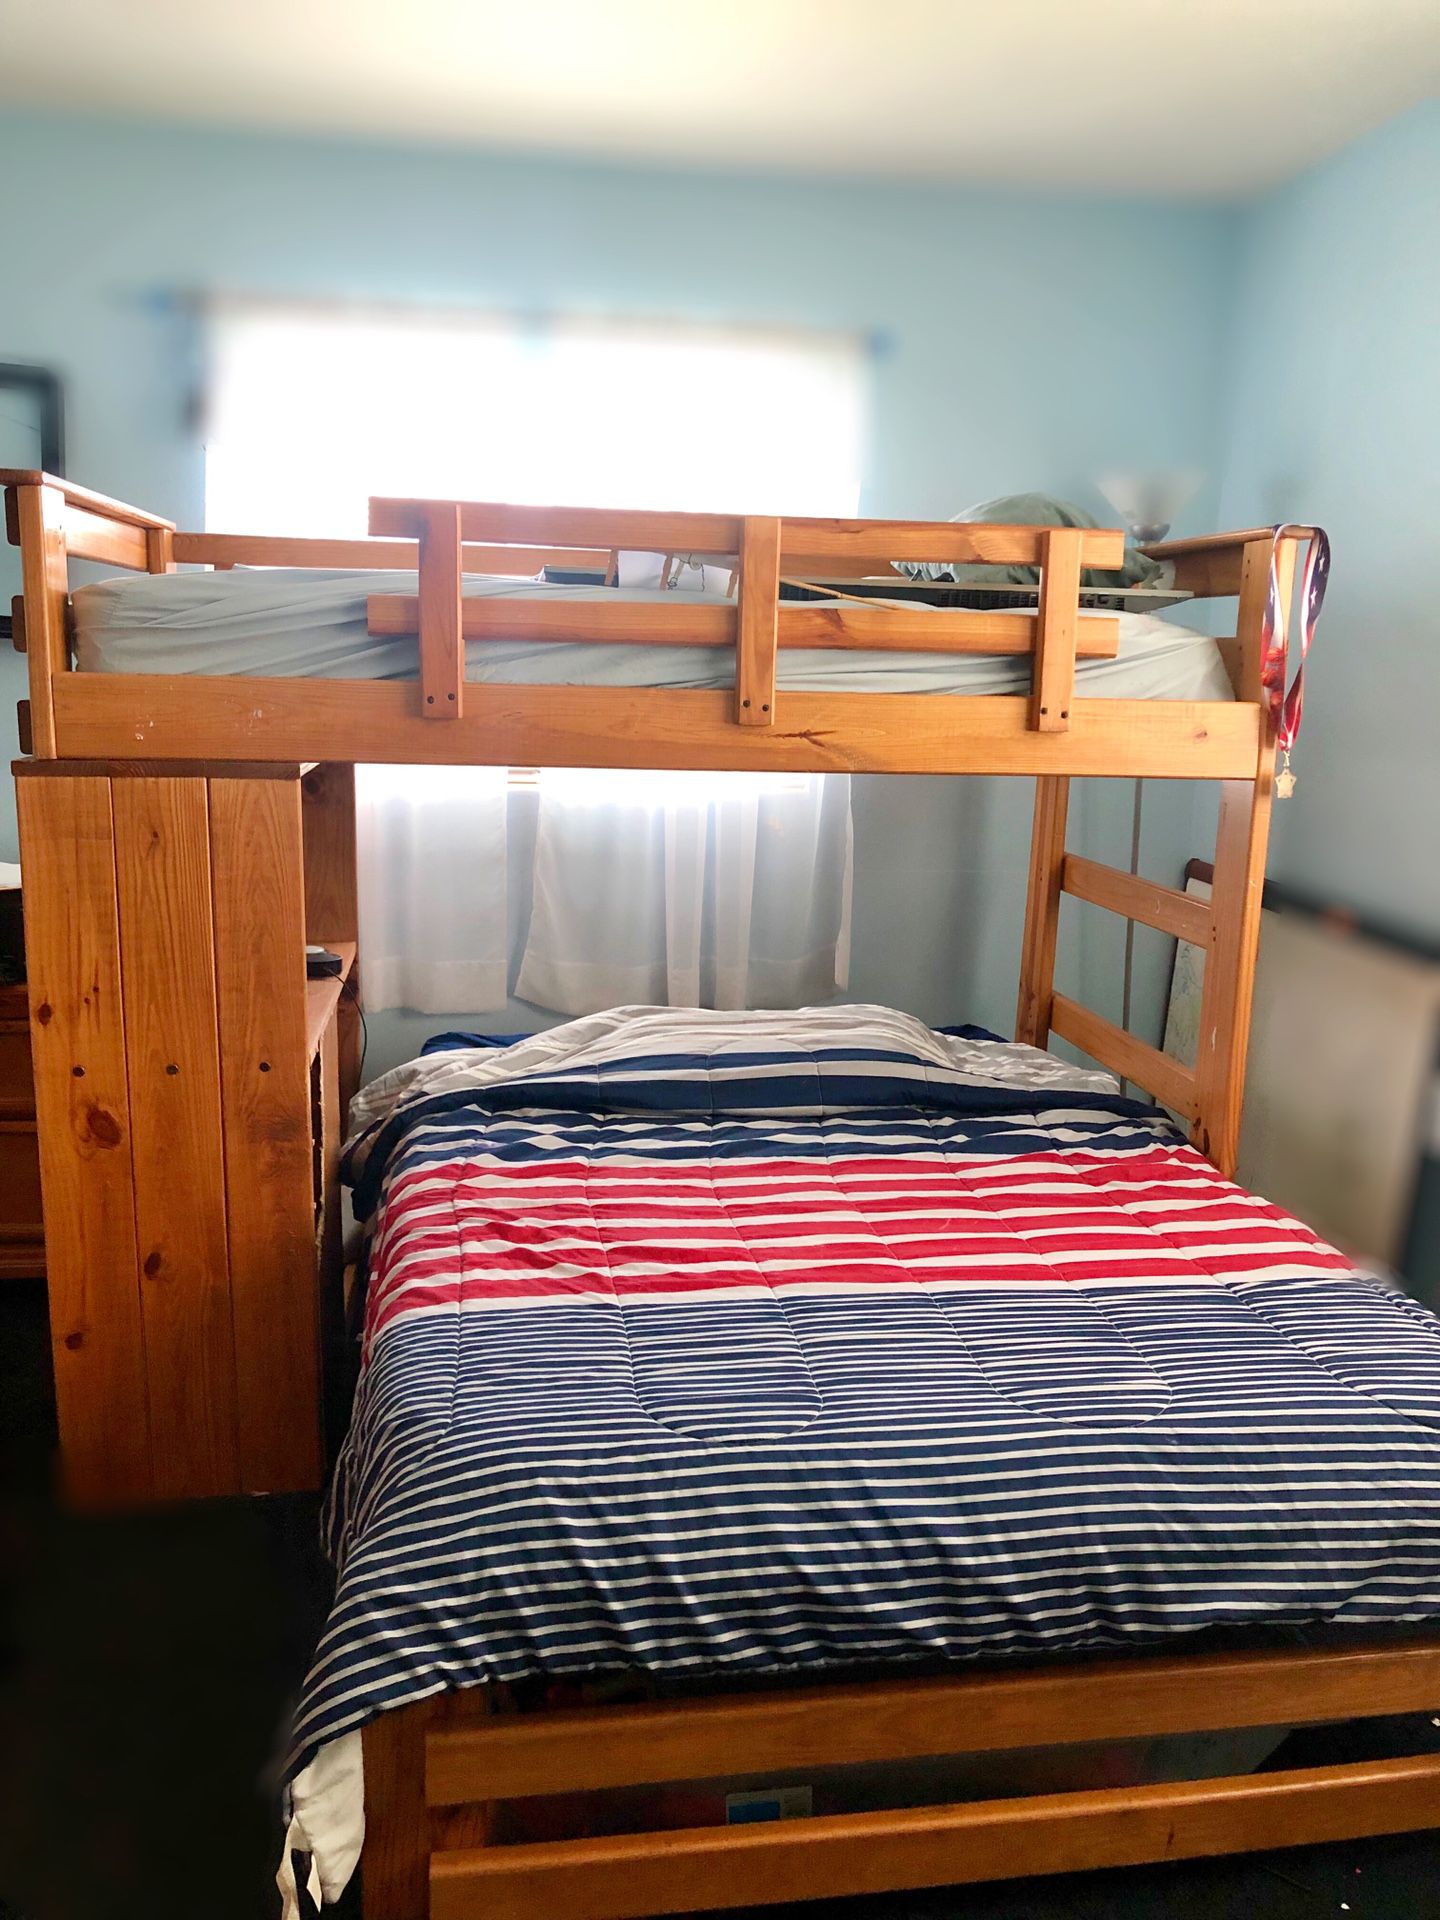 Solid wood bunk bed with desk, drawers and mattresses